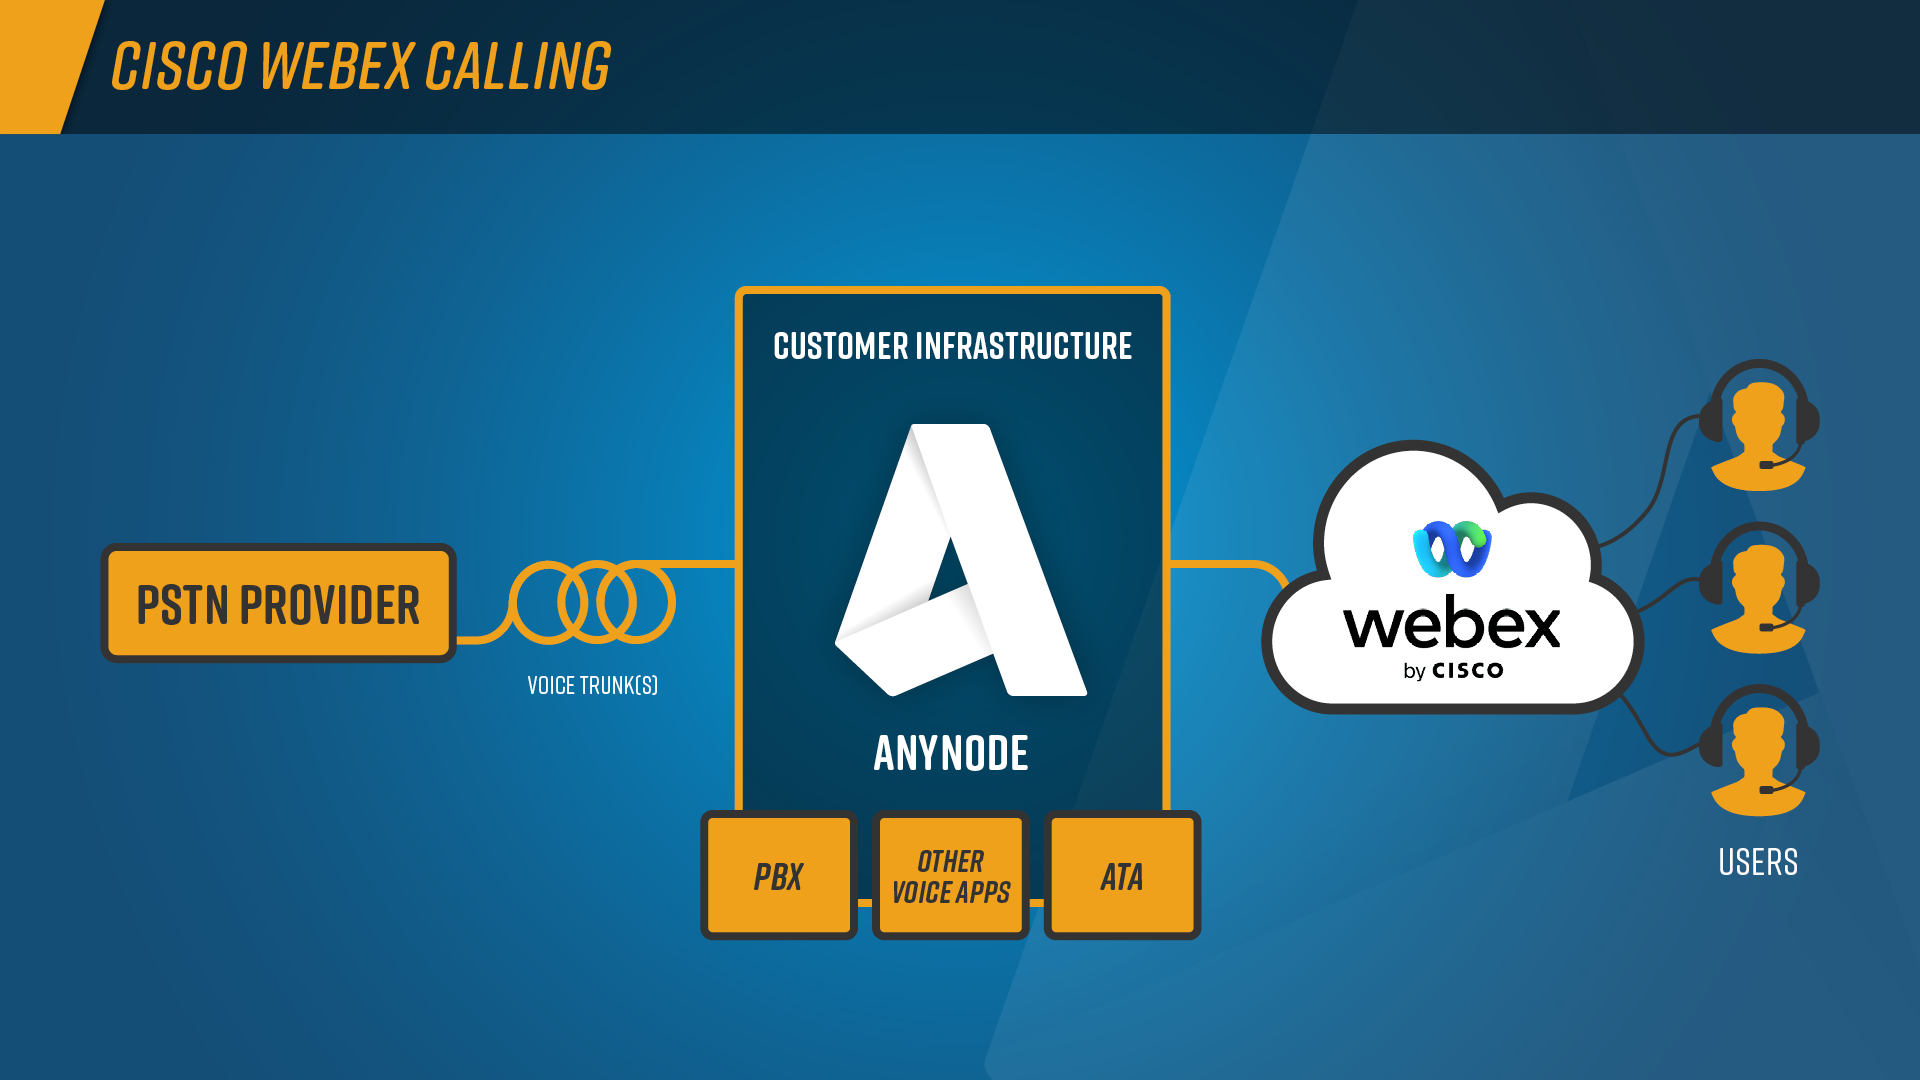 anynode-cisco-webex-calling-infographic-abstract